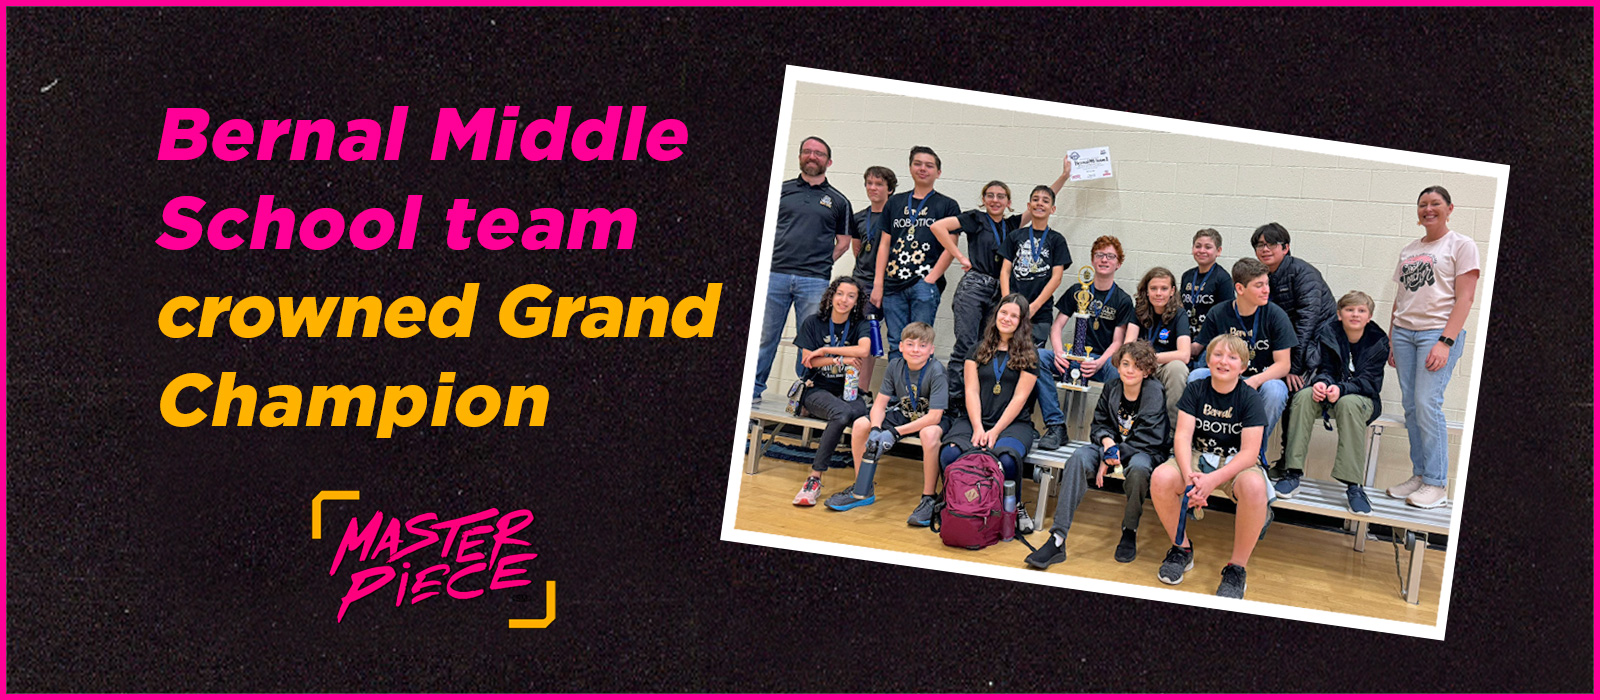 Bernal Middle School team crowned Grand Champion